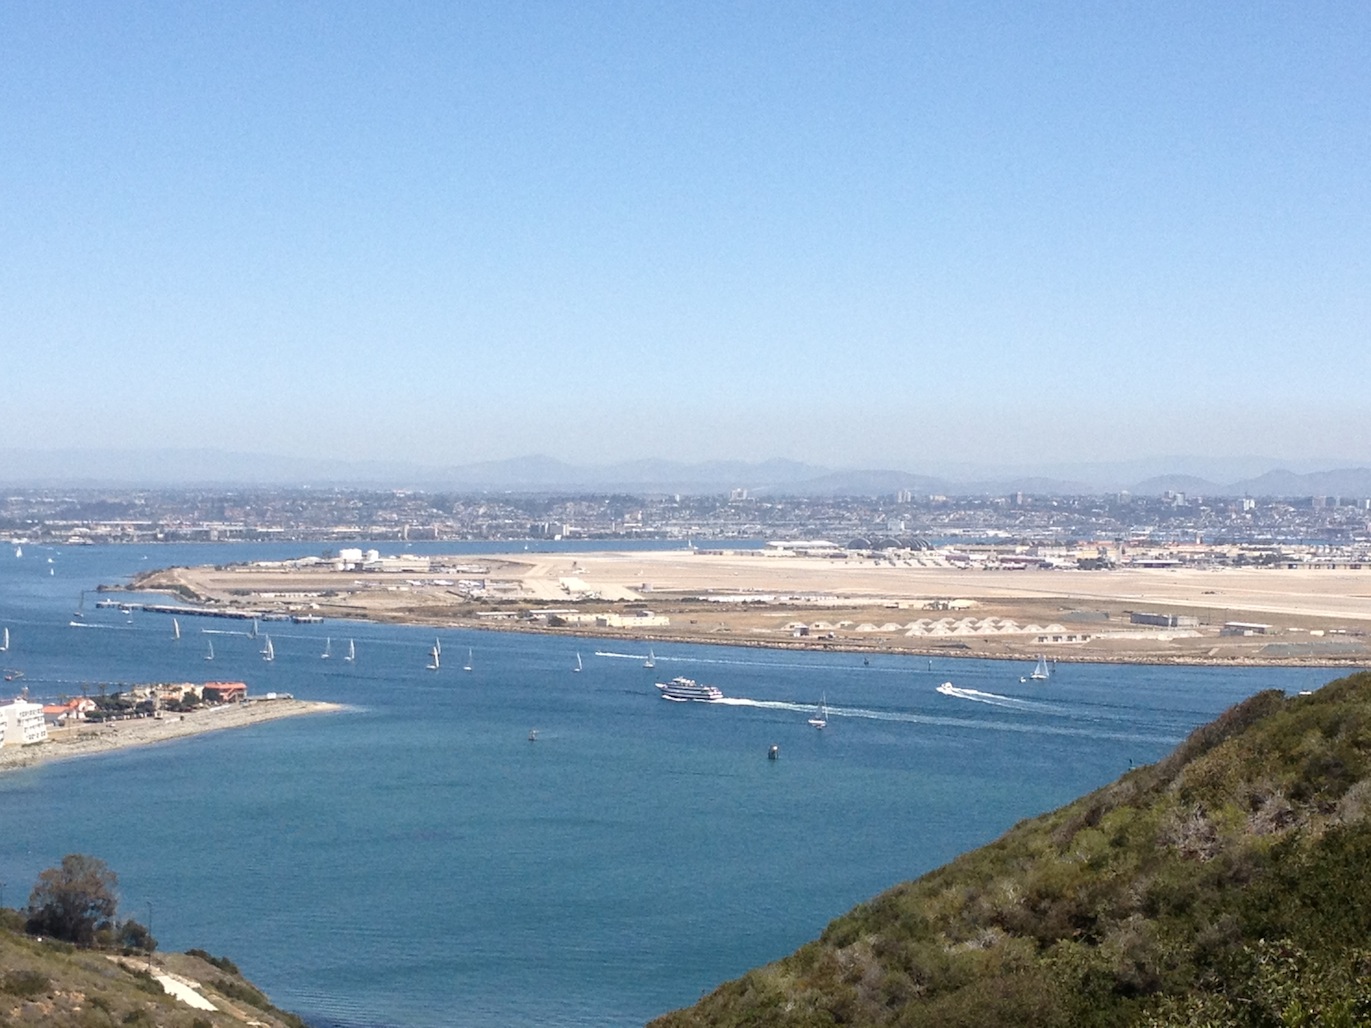 View from Point Loma towards downtown San Diego airport